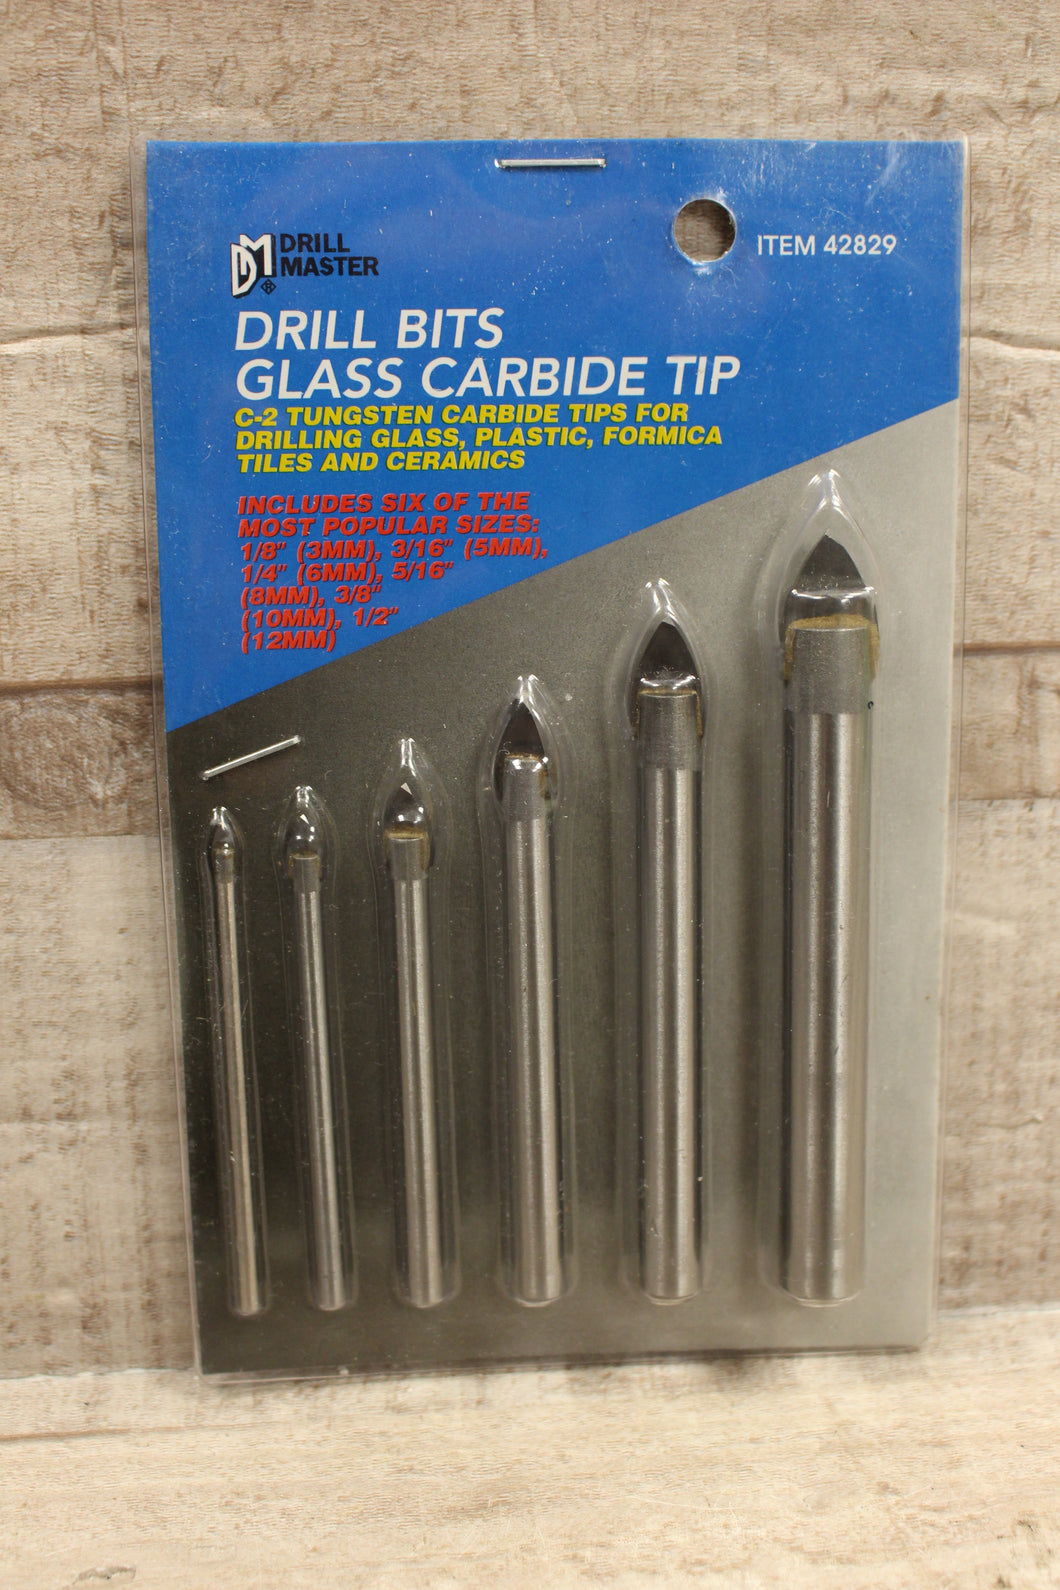 Drill Master Drill Bits Glass Carbide Tip 6-Pack -New